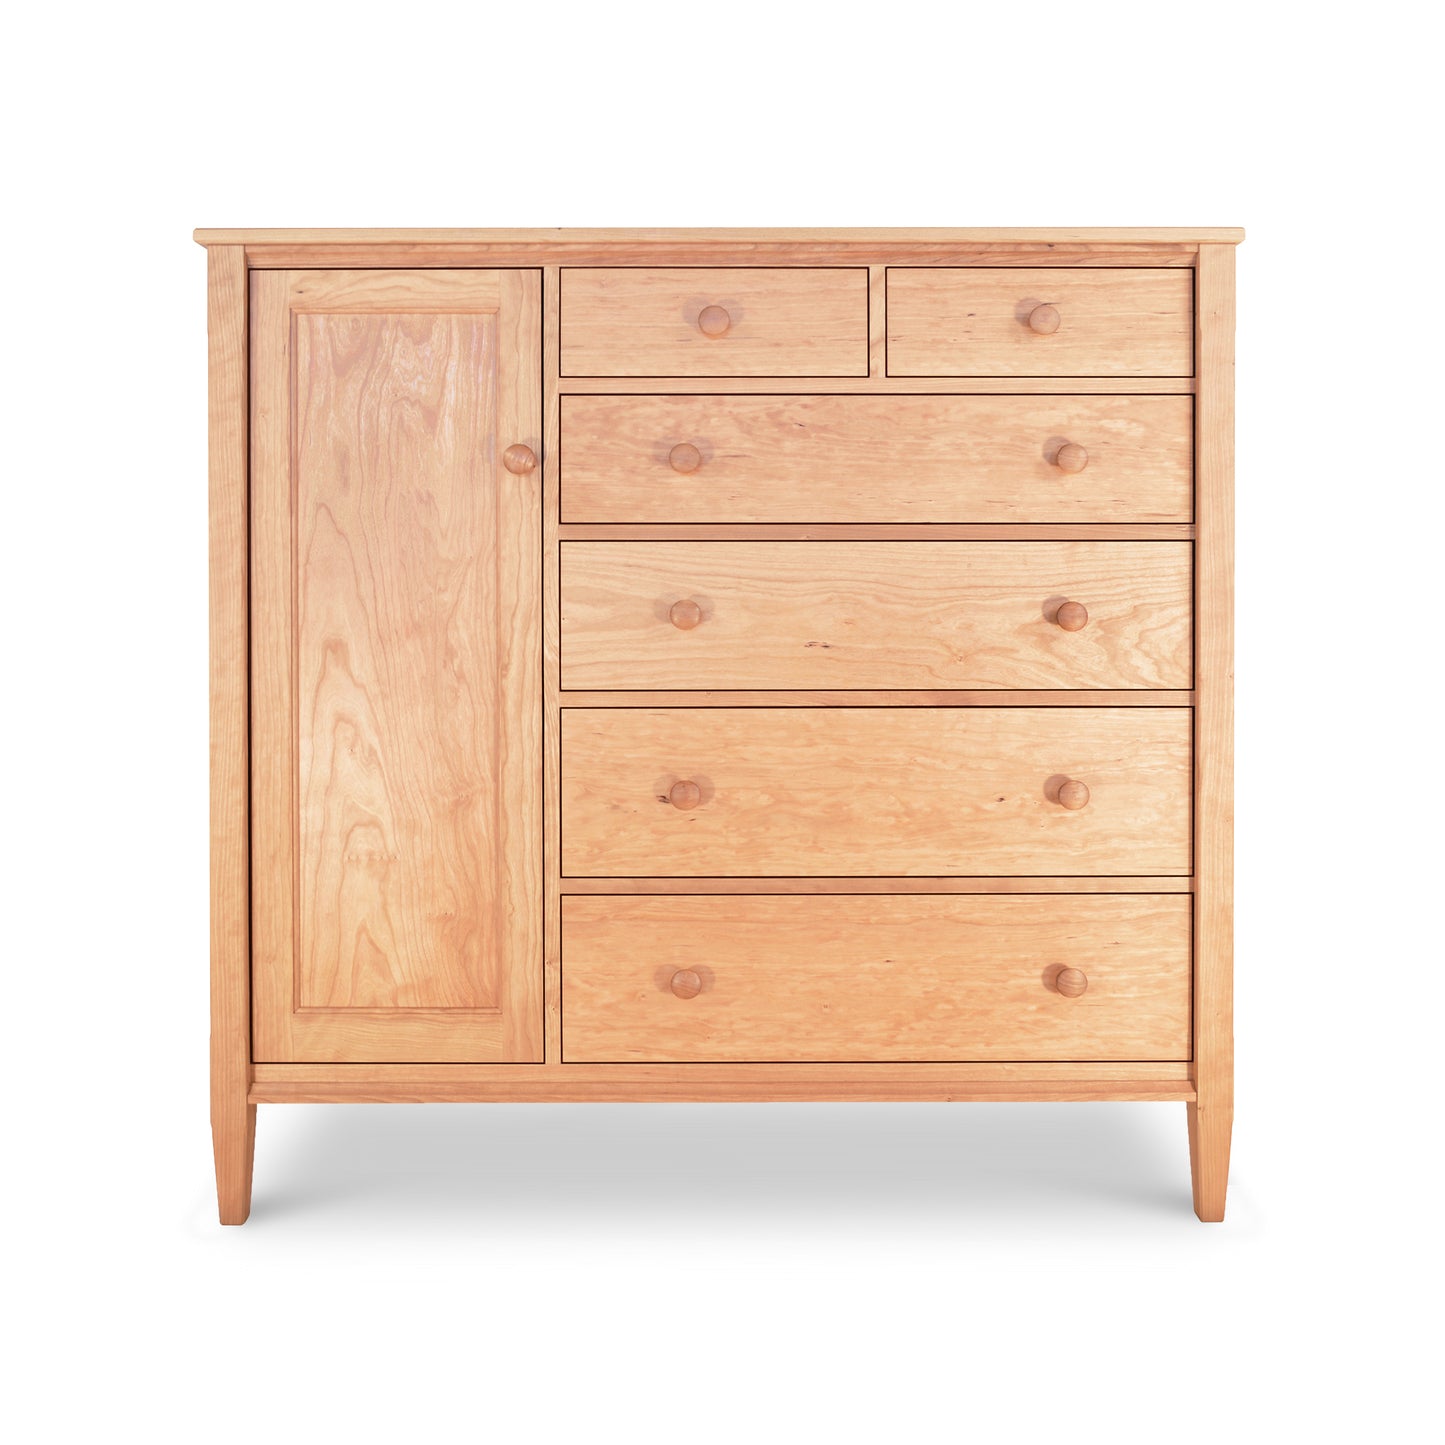 A Vermont Shaker Gent's Chest by Maple Corner Woodworks with one tall cabinet door on the left and five drawers of varying sizes on the right, all with round knobs, against a white background.